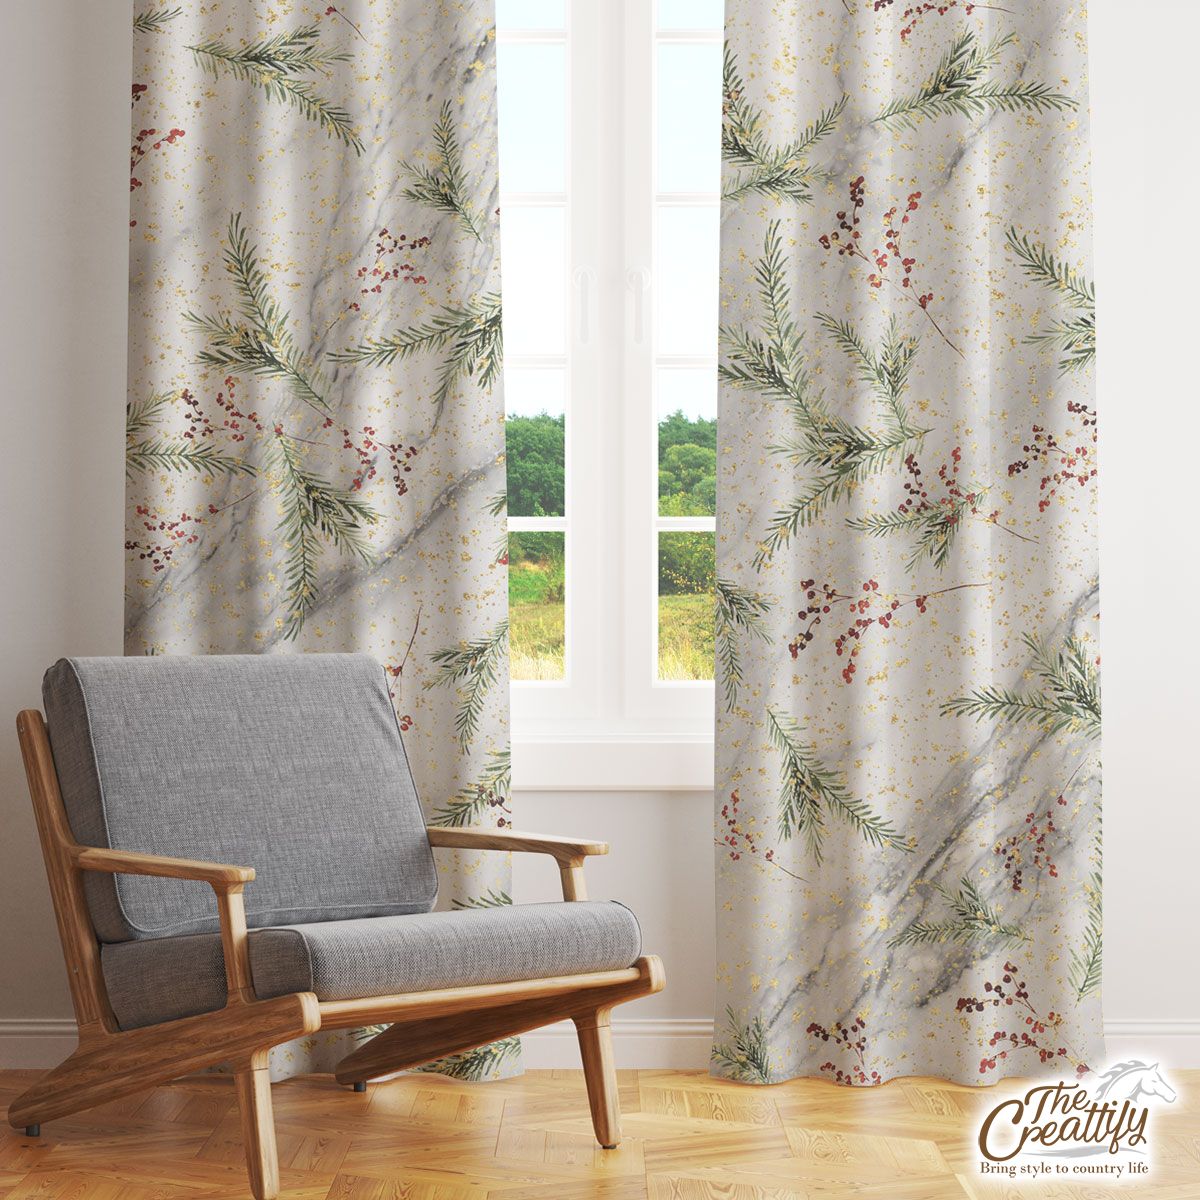 Red Berries With Pine Twig Pattern Window Curtain